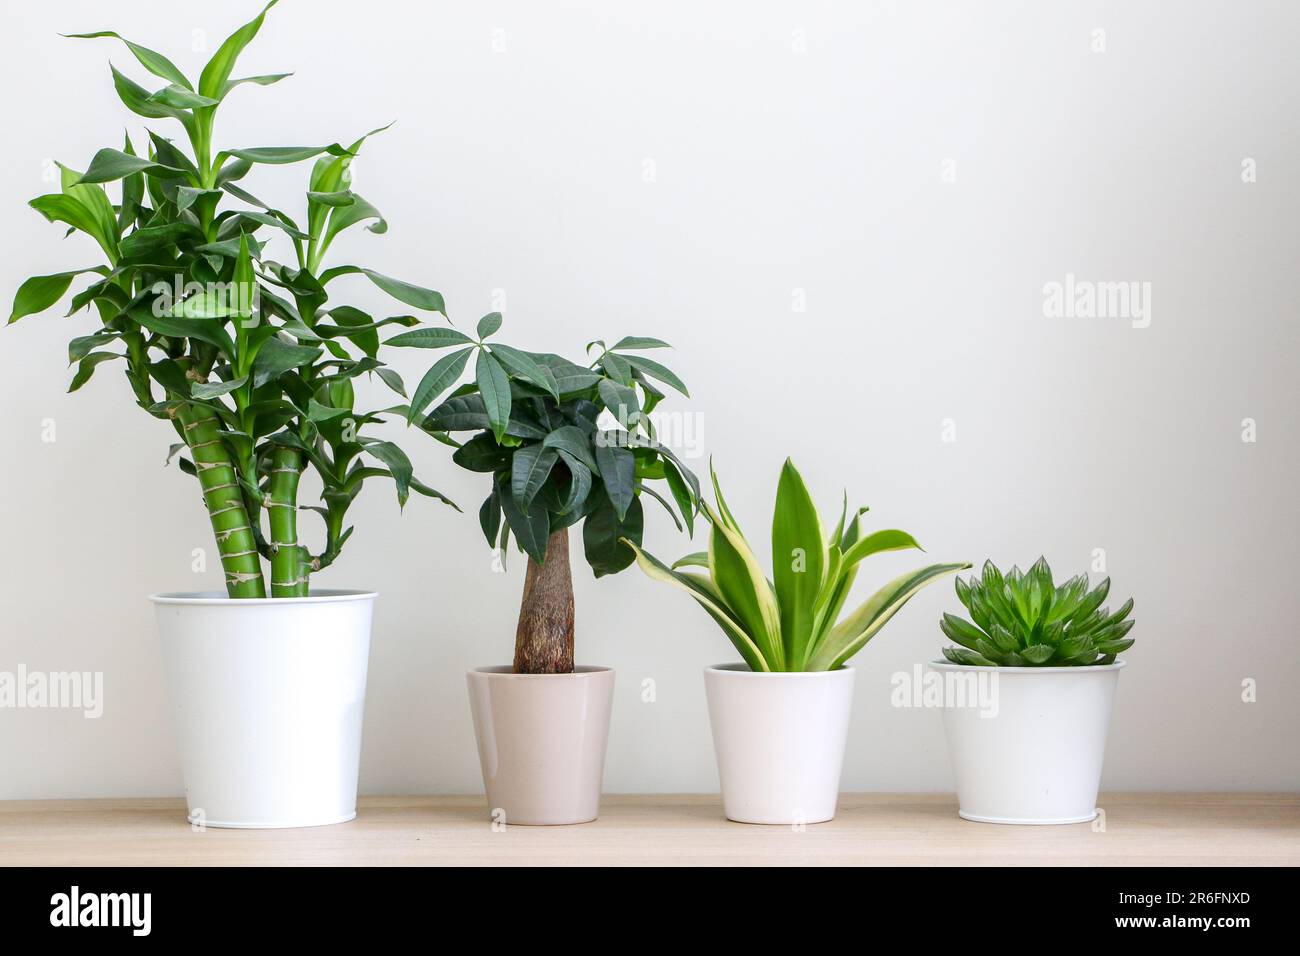 Close up of four different house plants lined tallest too smallest against white wall on wooden surface, freshening up and decorating home interior Stock Photo